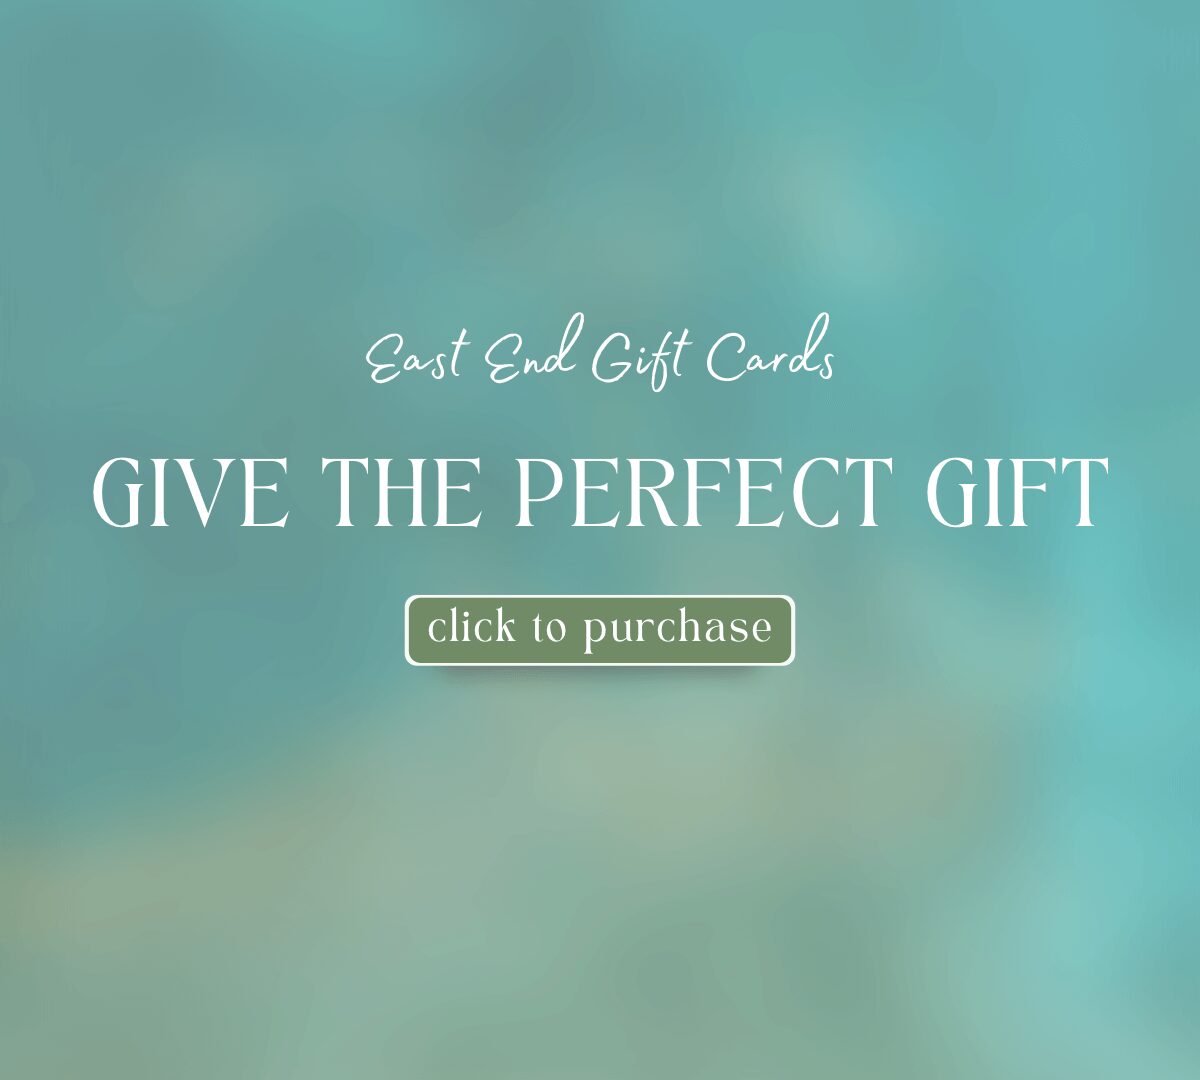 Give the perfect gift. East end gift card. click to purchase.